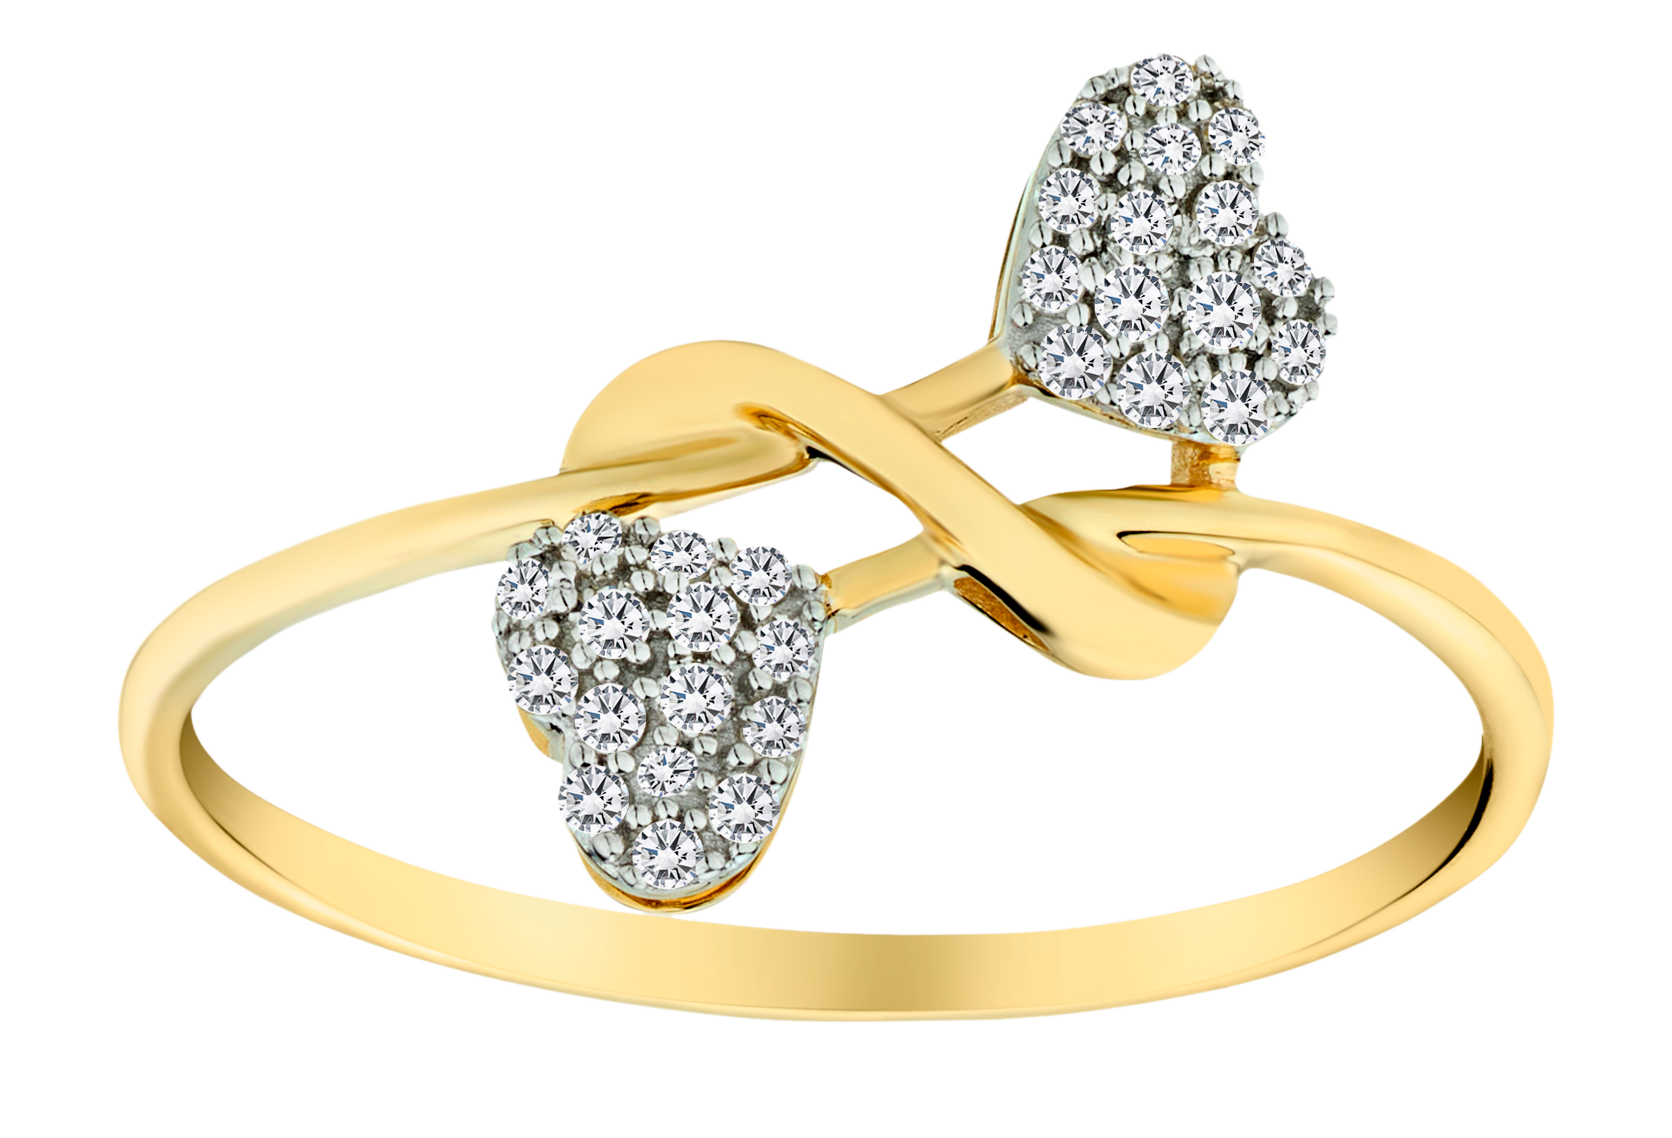 .12 Carat of Diamonds "Double Heart" Ring, 10kt Yellow Gold.....................NOW